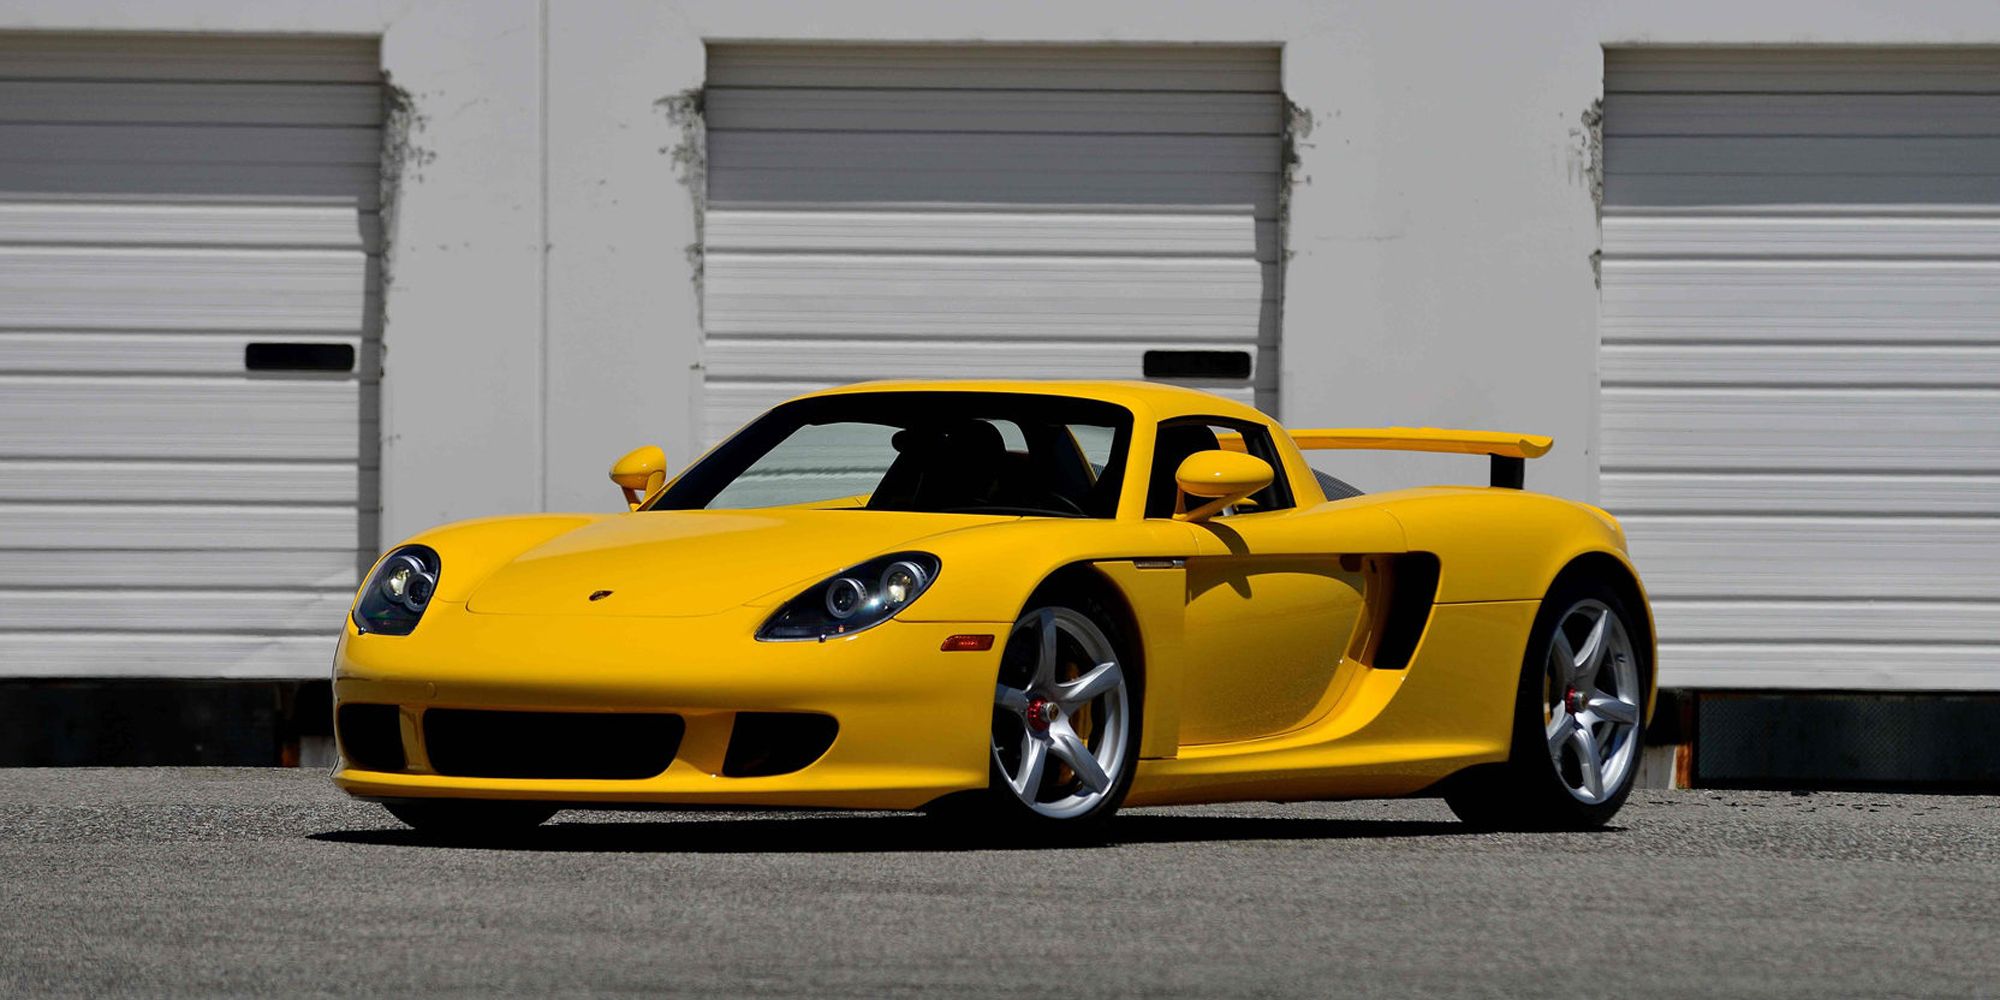 The front of a yellow Carrera GT